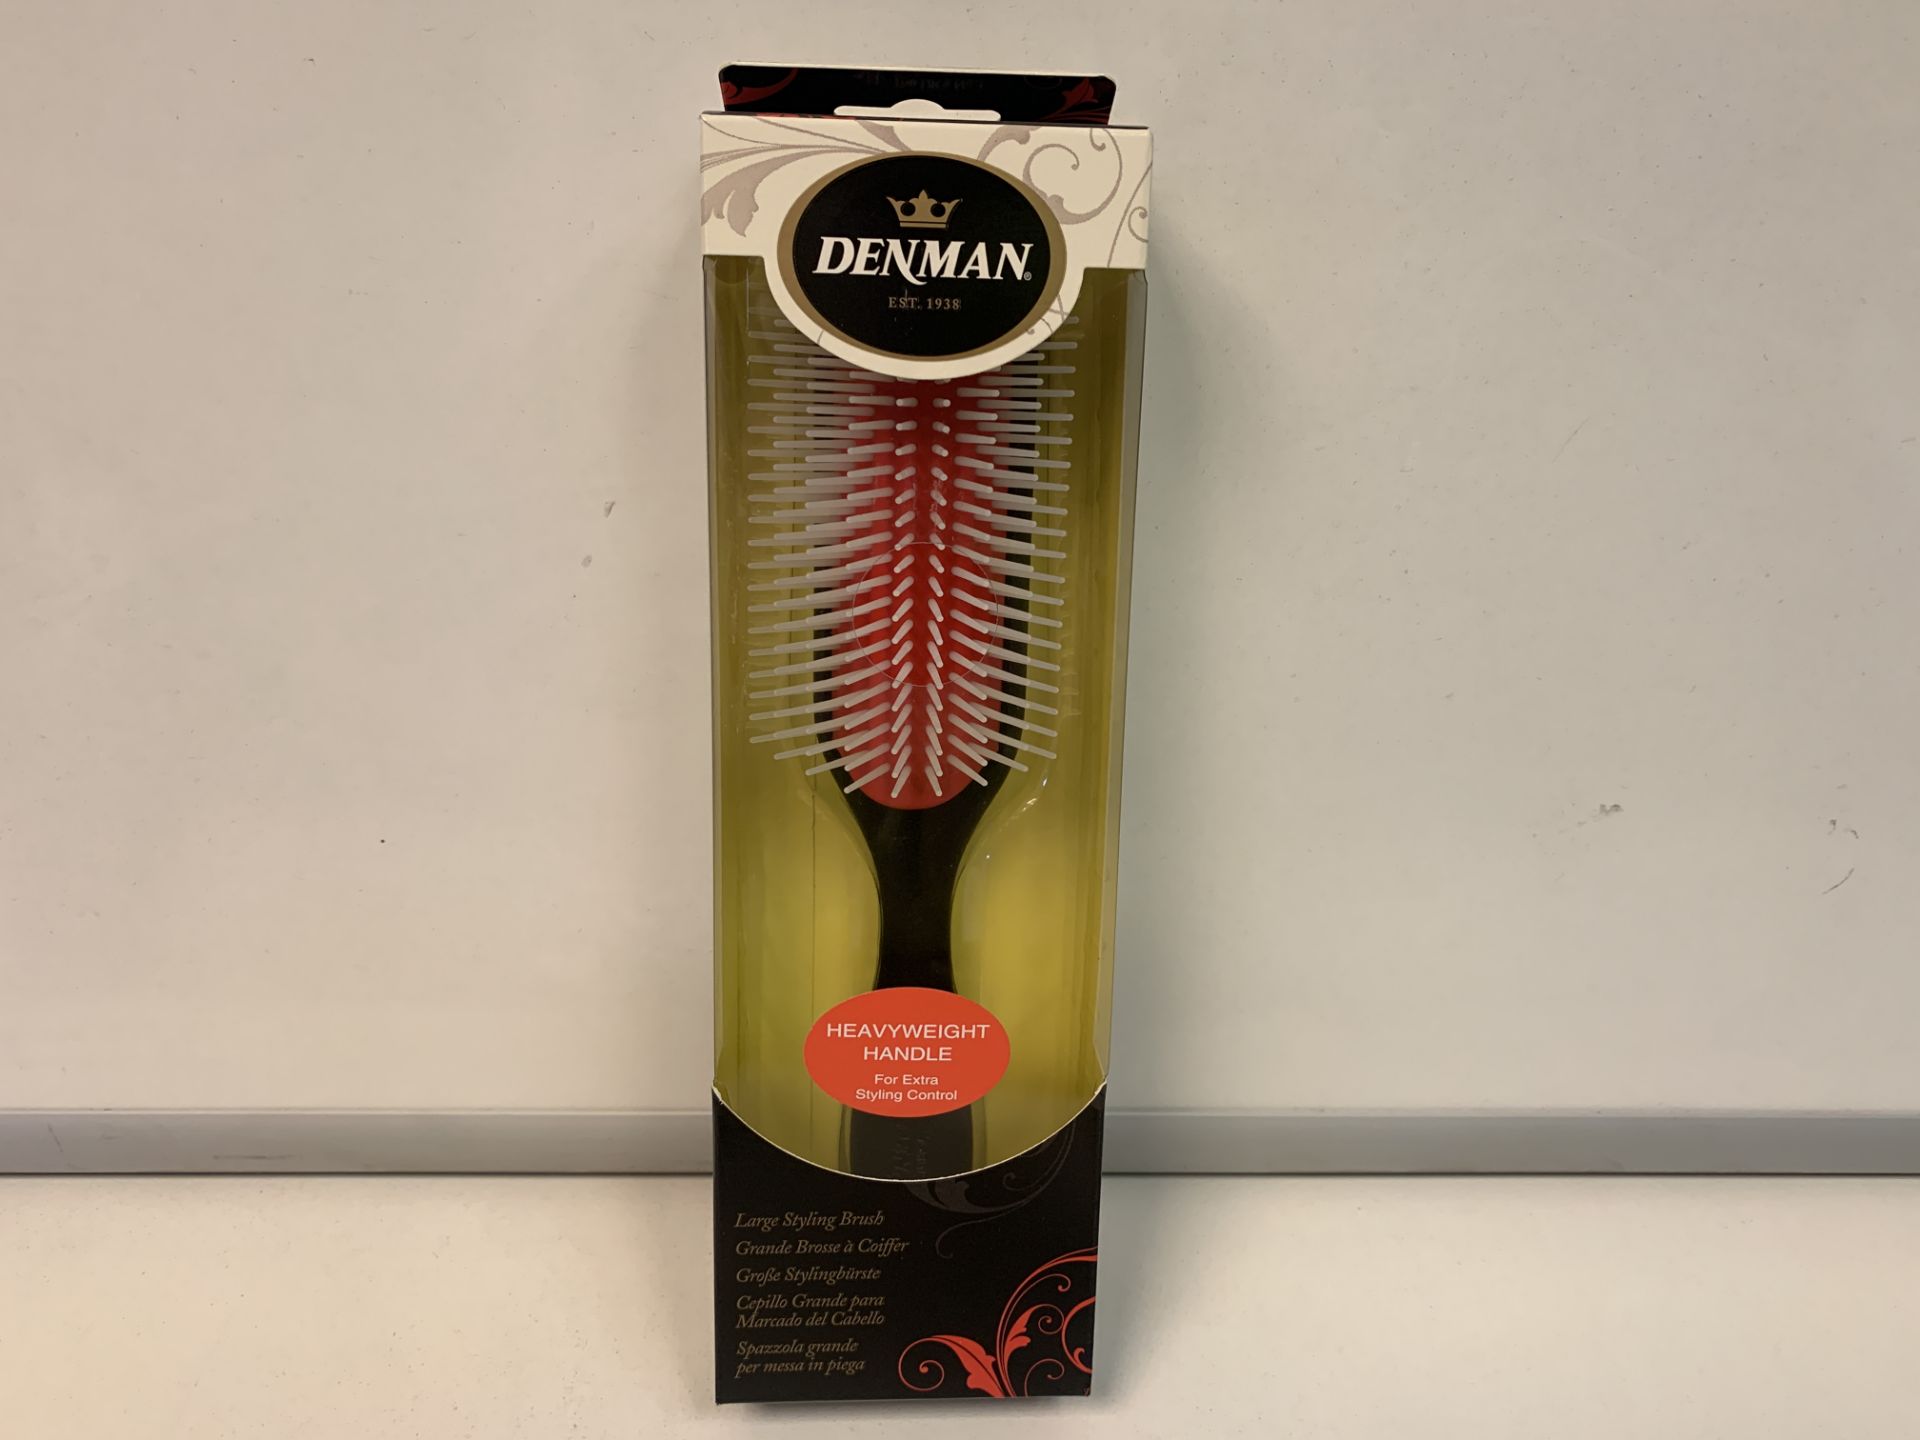 26 X BRAND NEW DENMAN HEAVYWEIGHT HANDLE LARGE STYLING BRUSHES